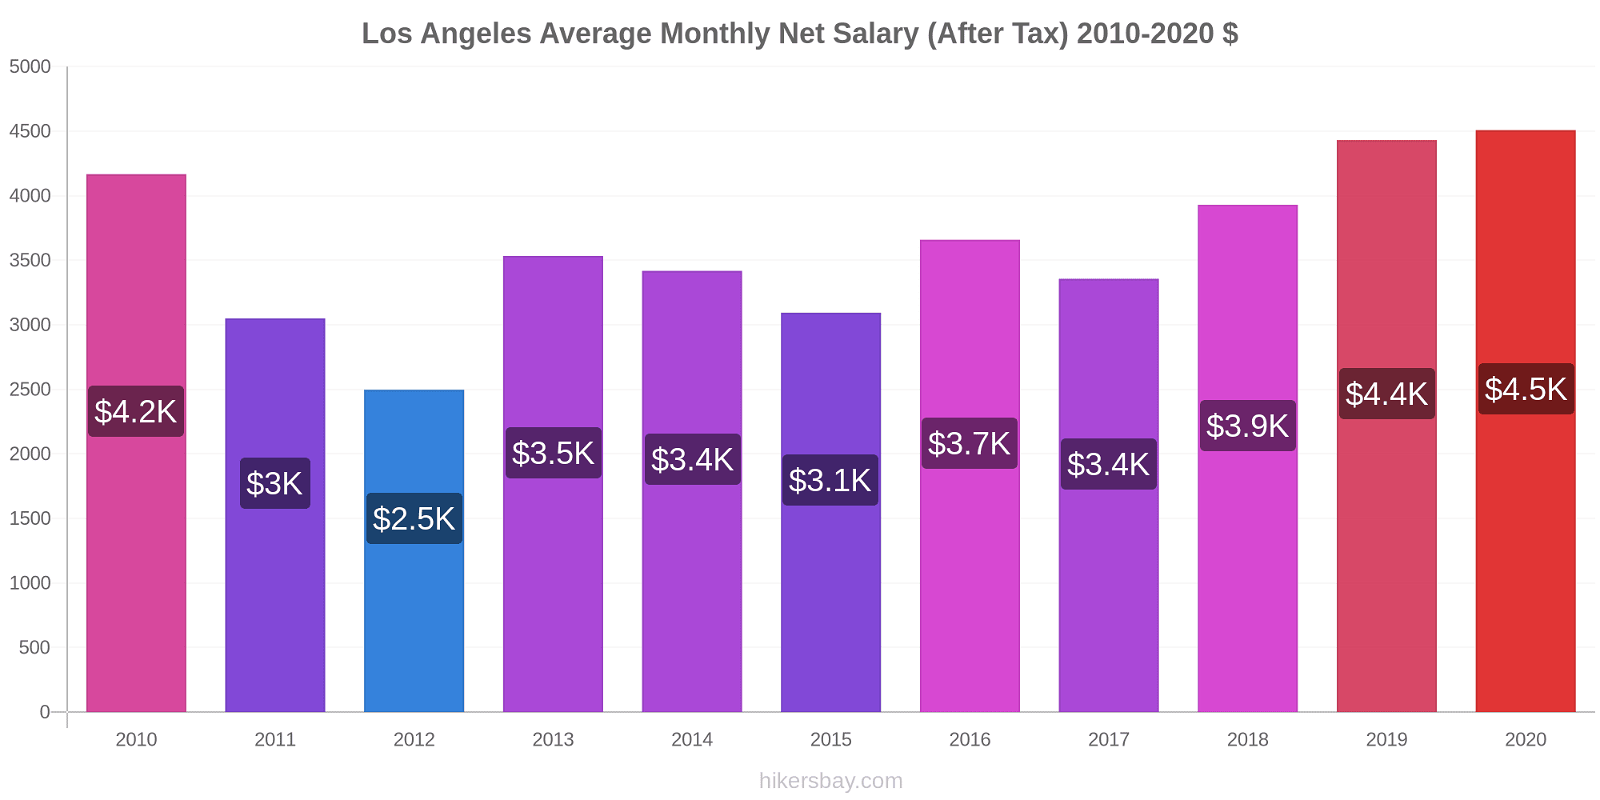 Los Angeles price changes Average Monthly Net Salary (After Tax) hikersbay.com